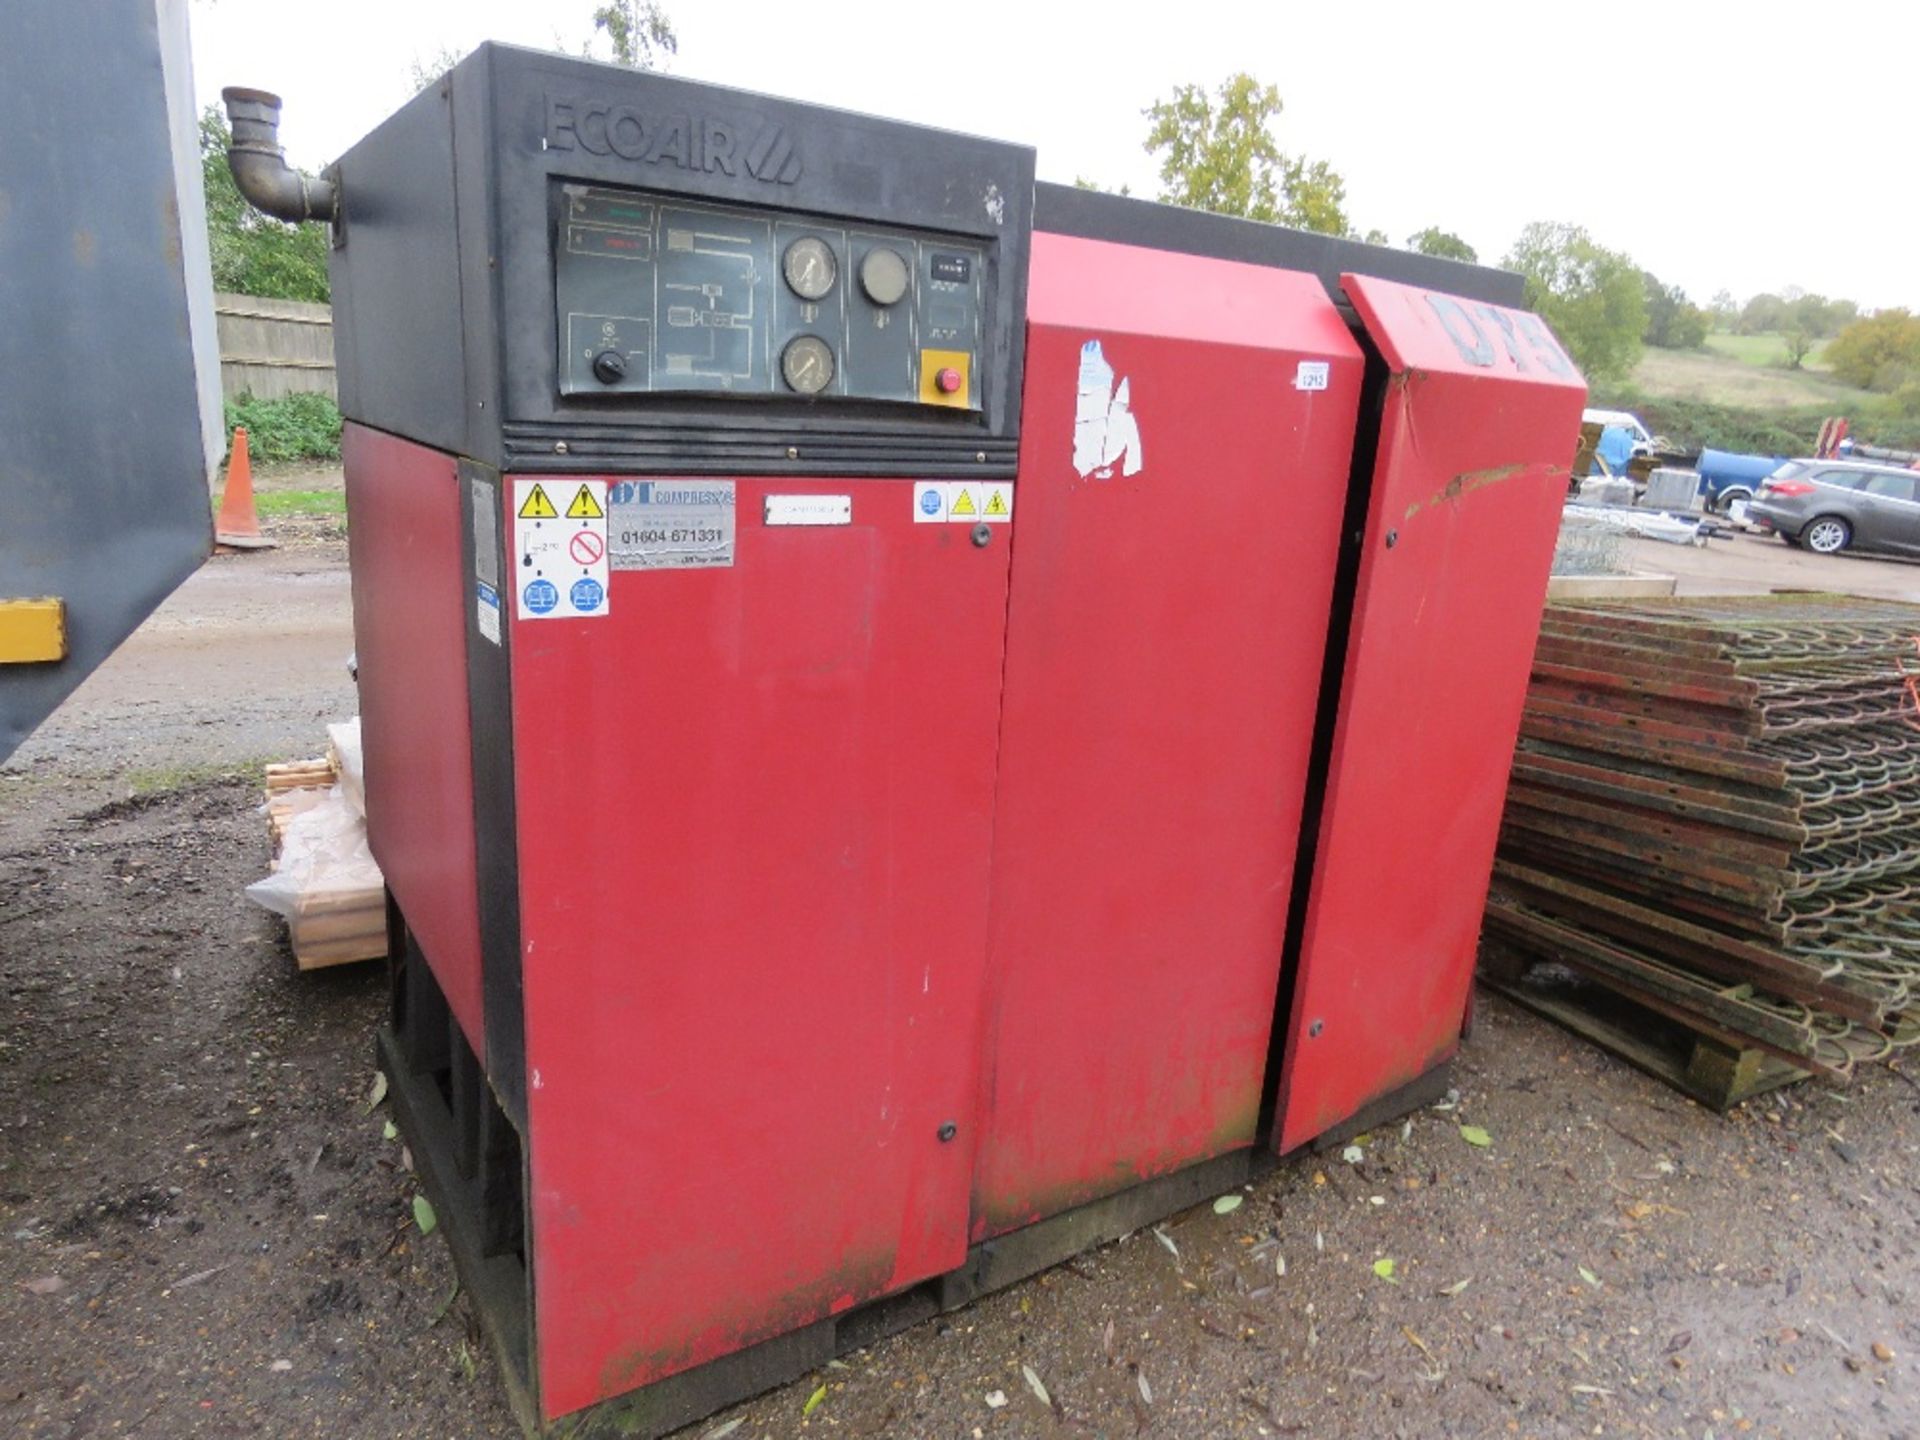 ECOAIR D75 LARGE SIZED PACKAGED AIR COMPRESSOR. SOURCED FROM SITE CLOSURE.